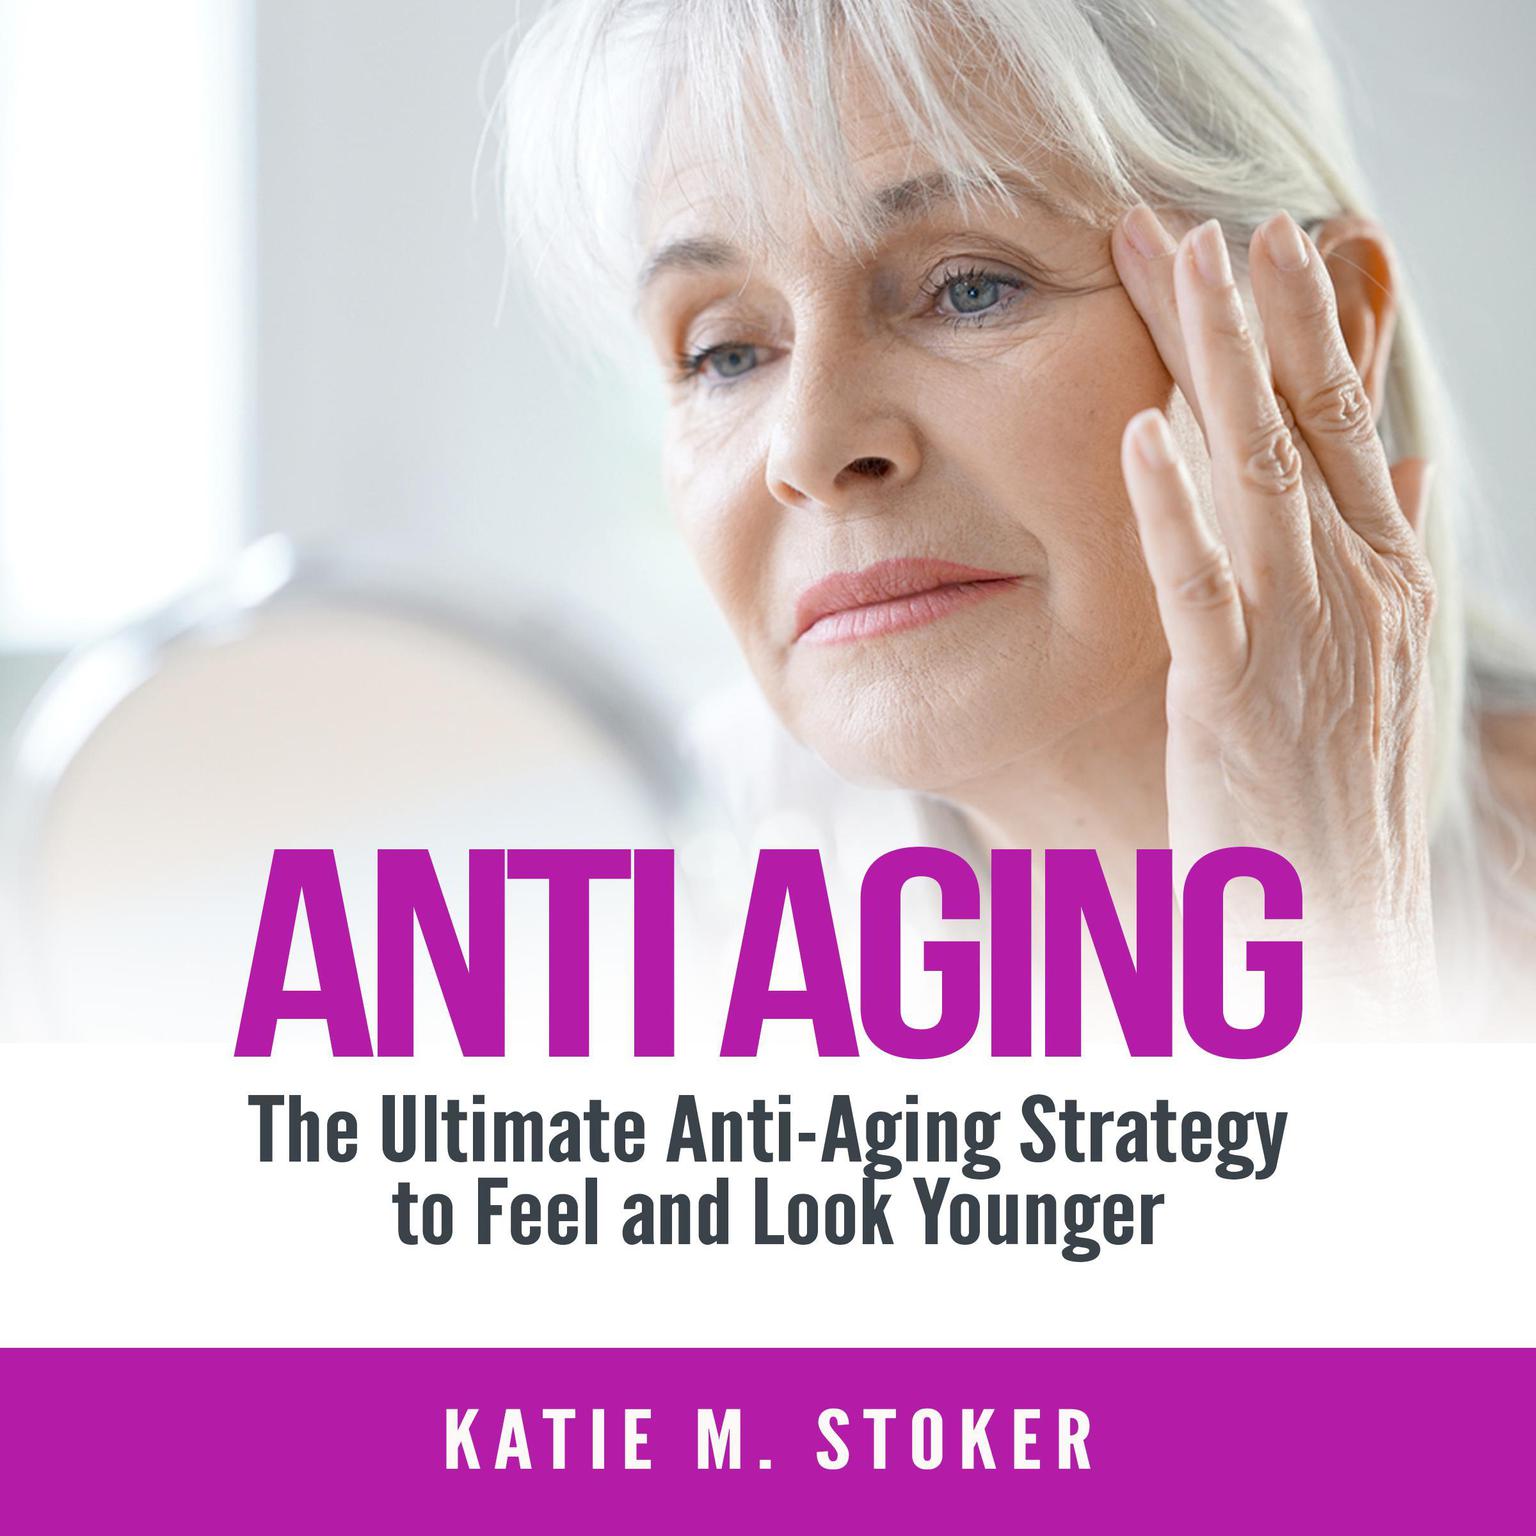 Anti Aging: The Ultimate Anti-Aging Strategy to Feel and Look Younger Audiobook, by Katie M. Stoker